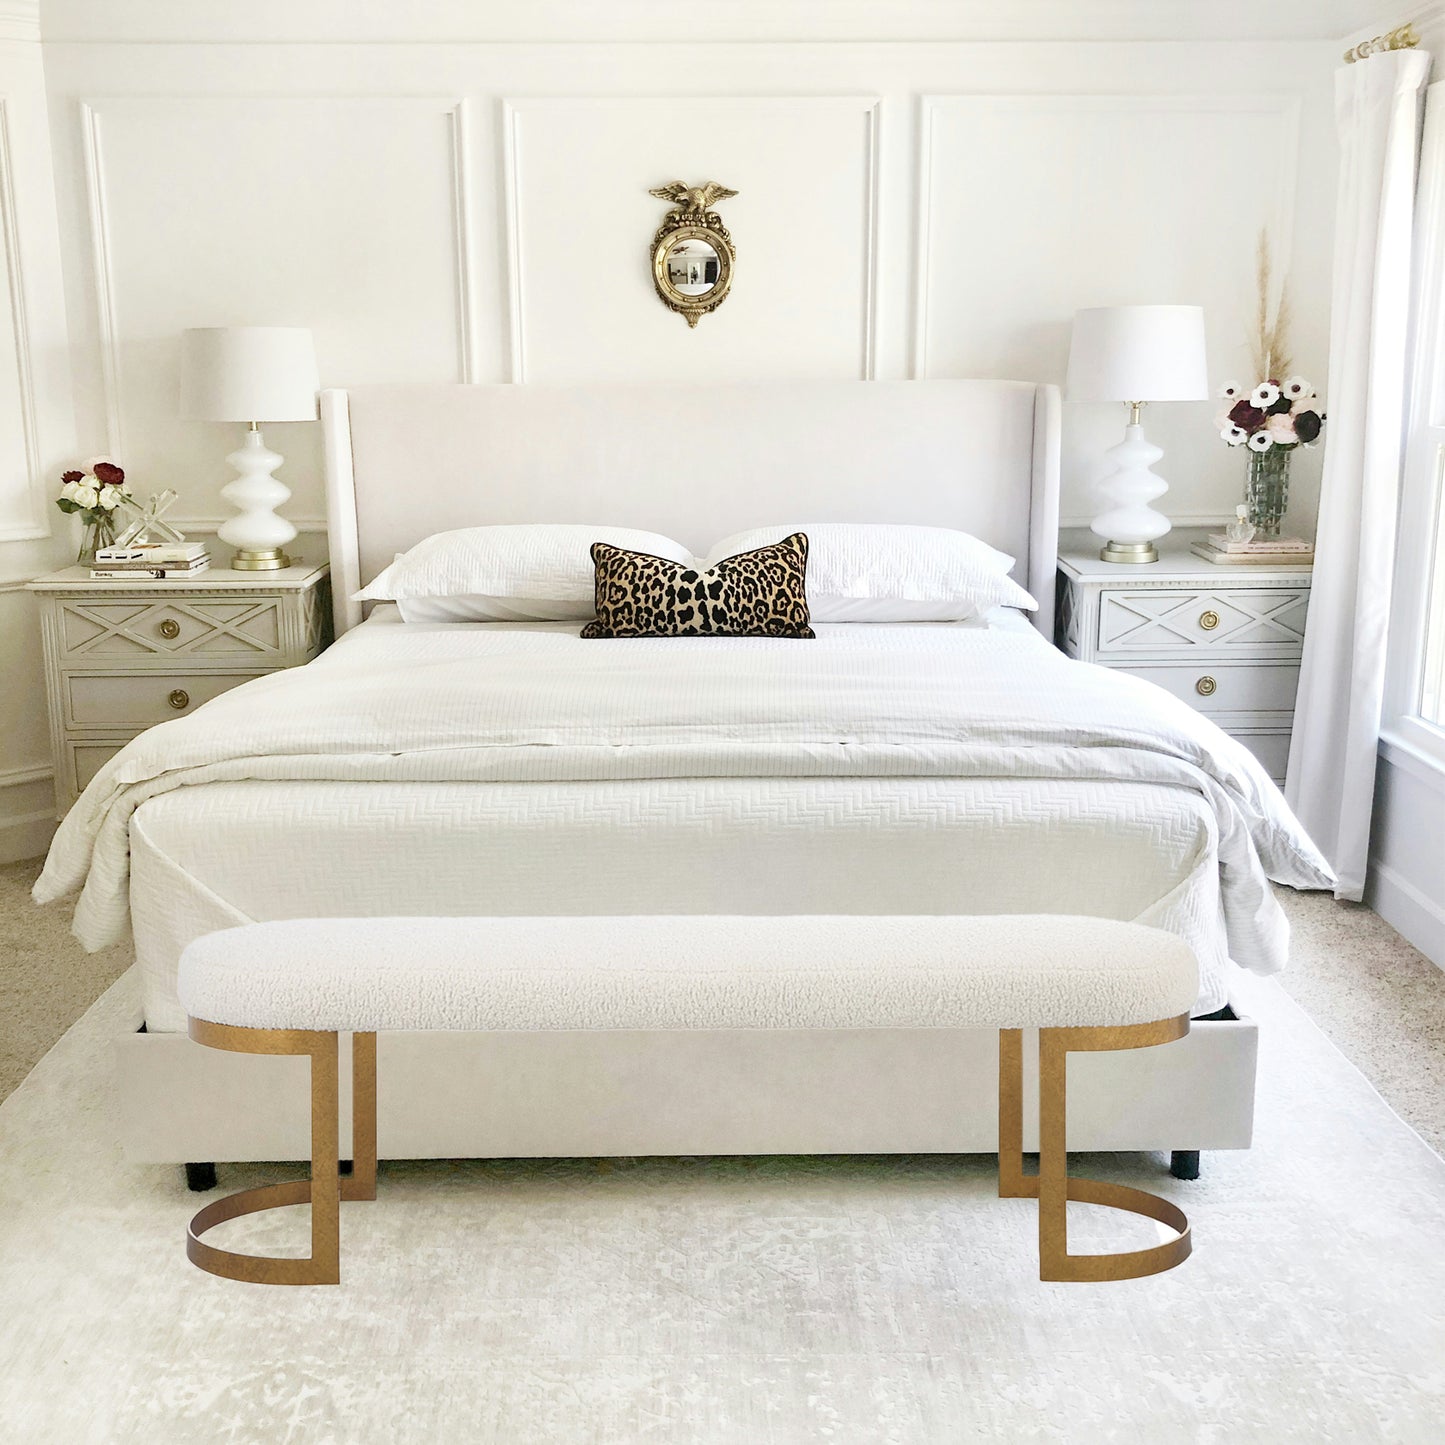 Gold Bench at the foot of a white bed in a bedroom.